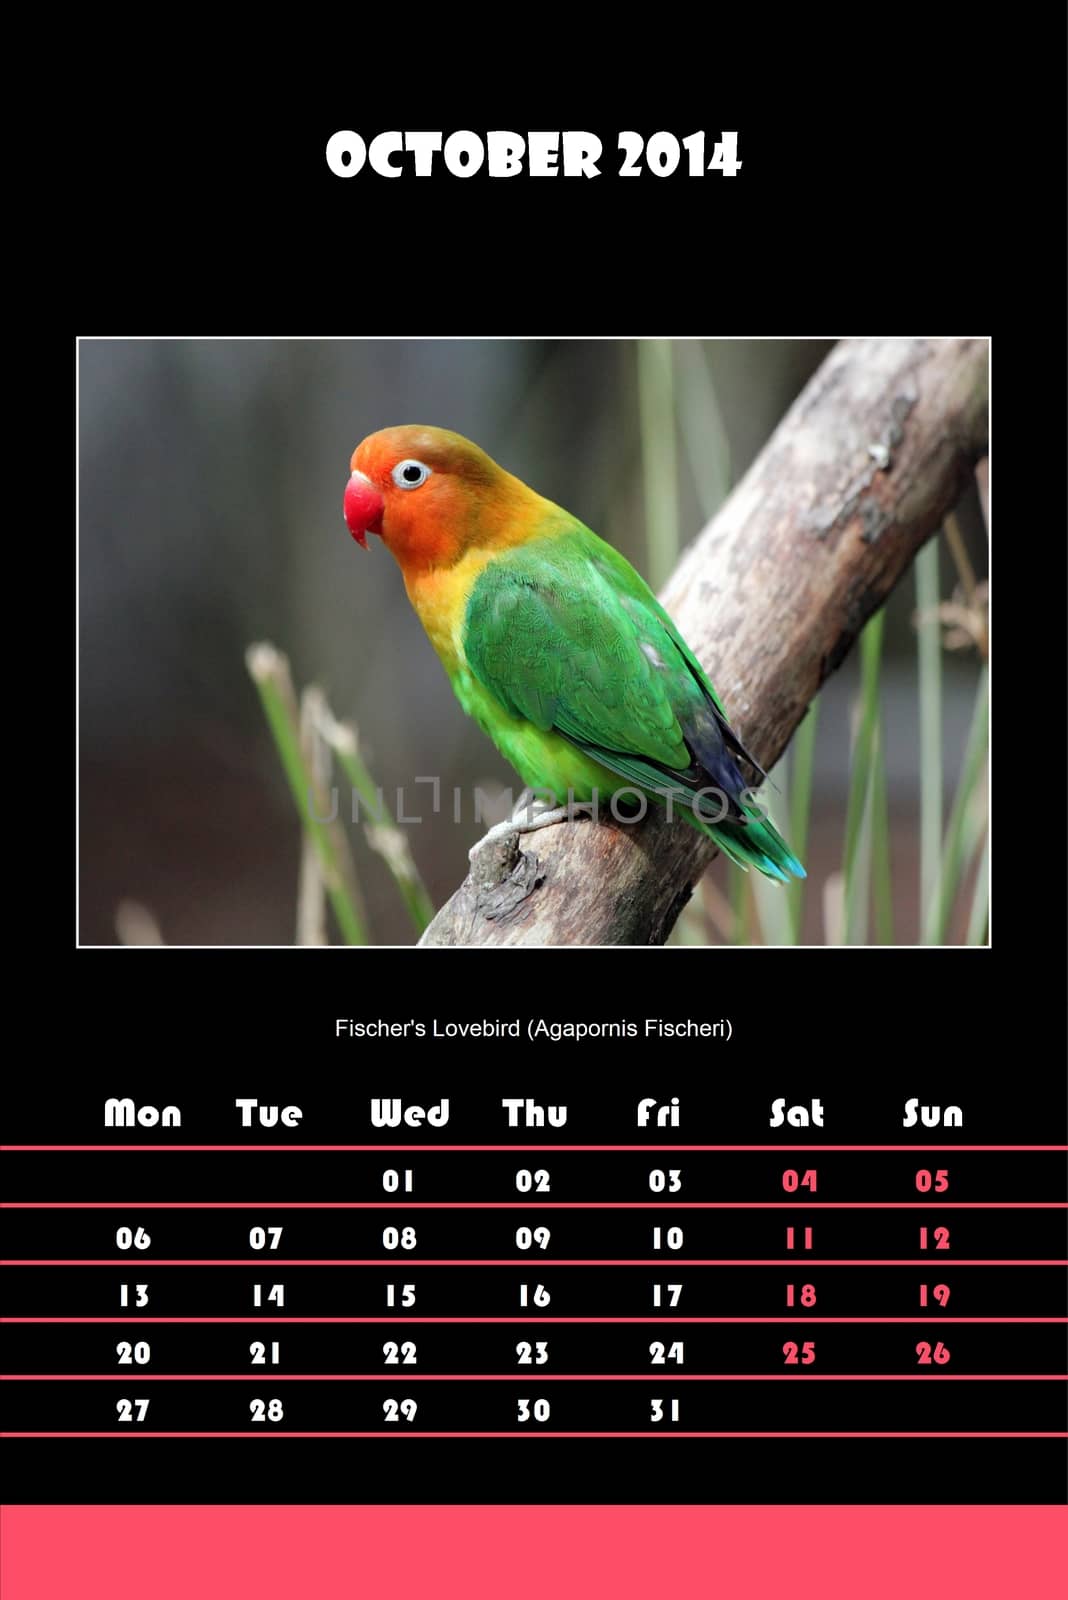 Colorful english calendar for october 2014 in black background, fischer's lovebird (agapornis fischeri) picture